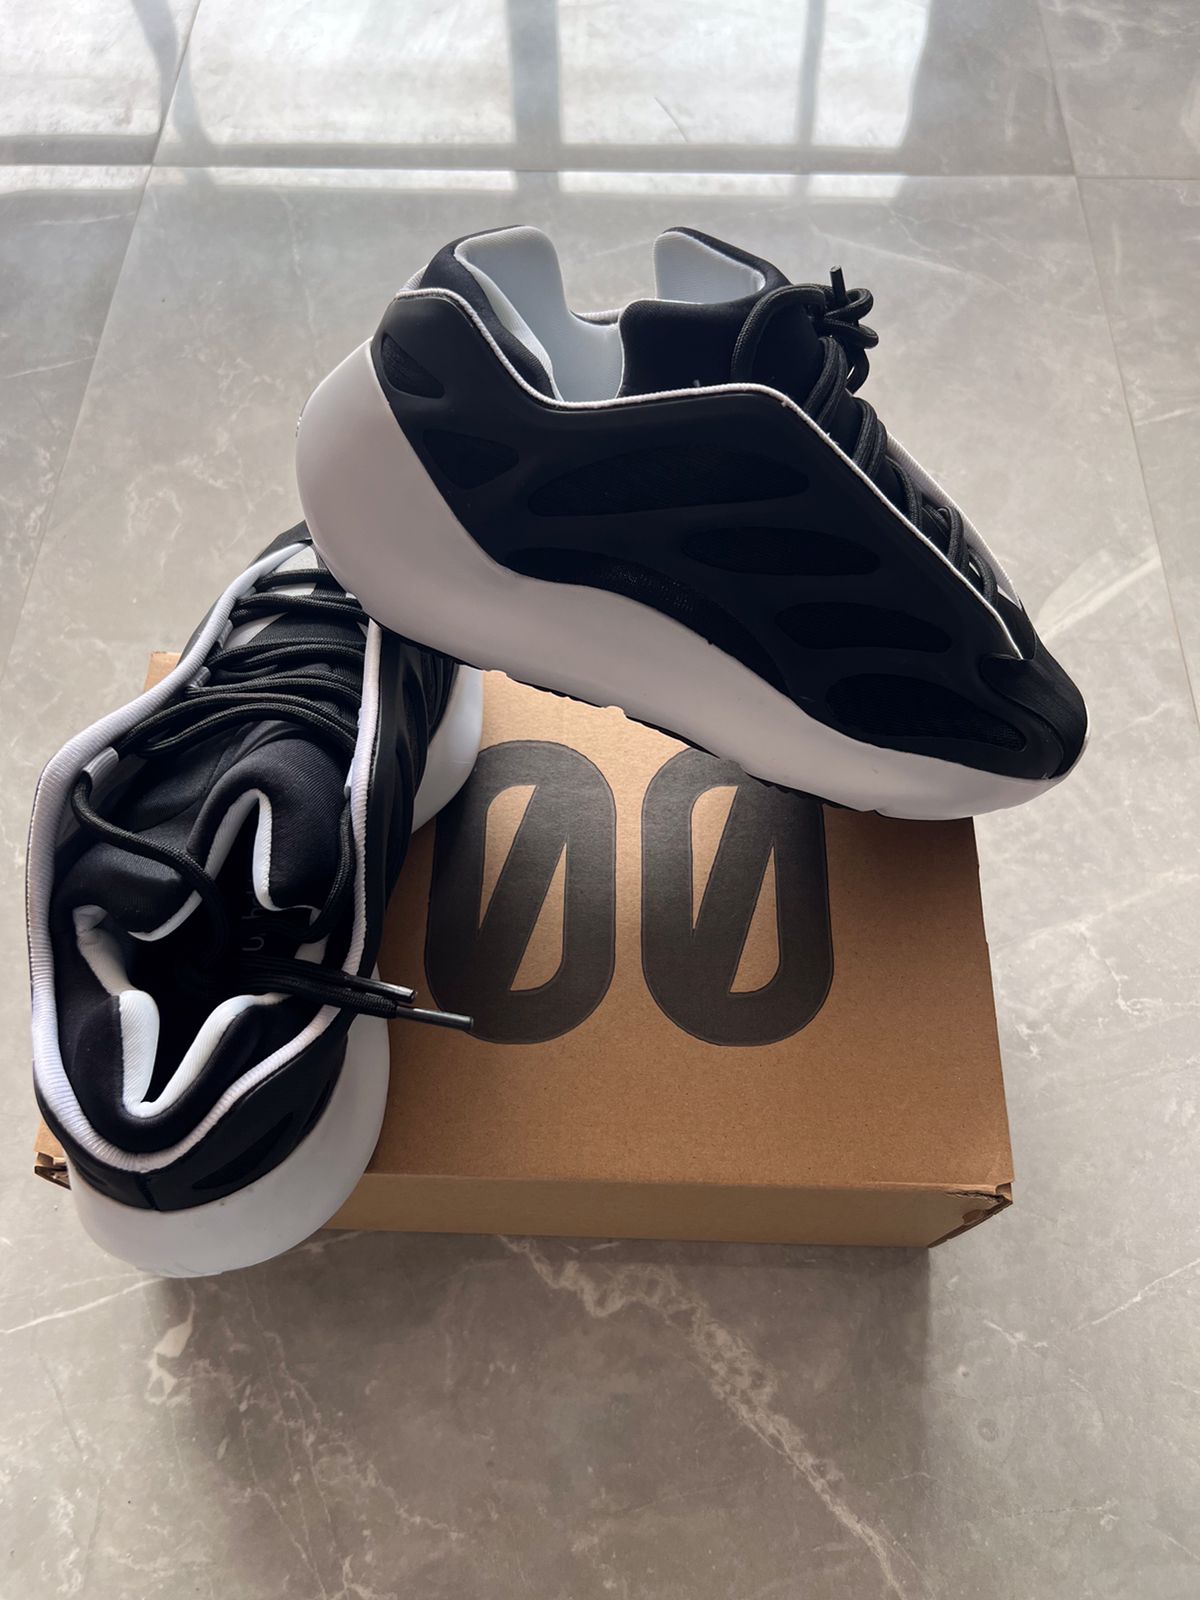 Imported Latest Yzy 700 V3 Sneakers In Stock